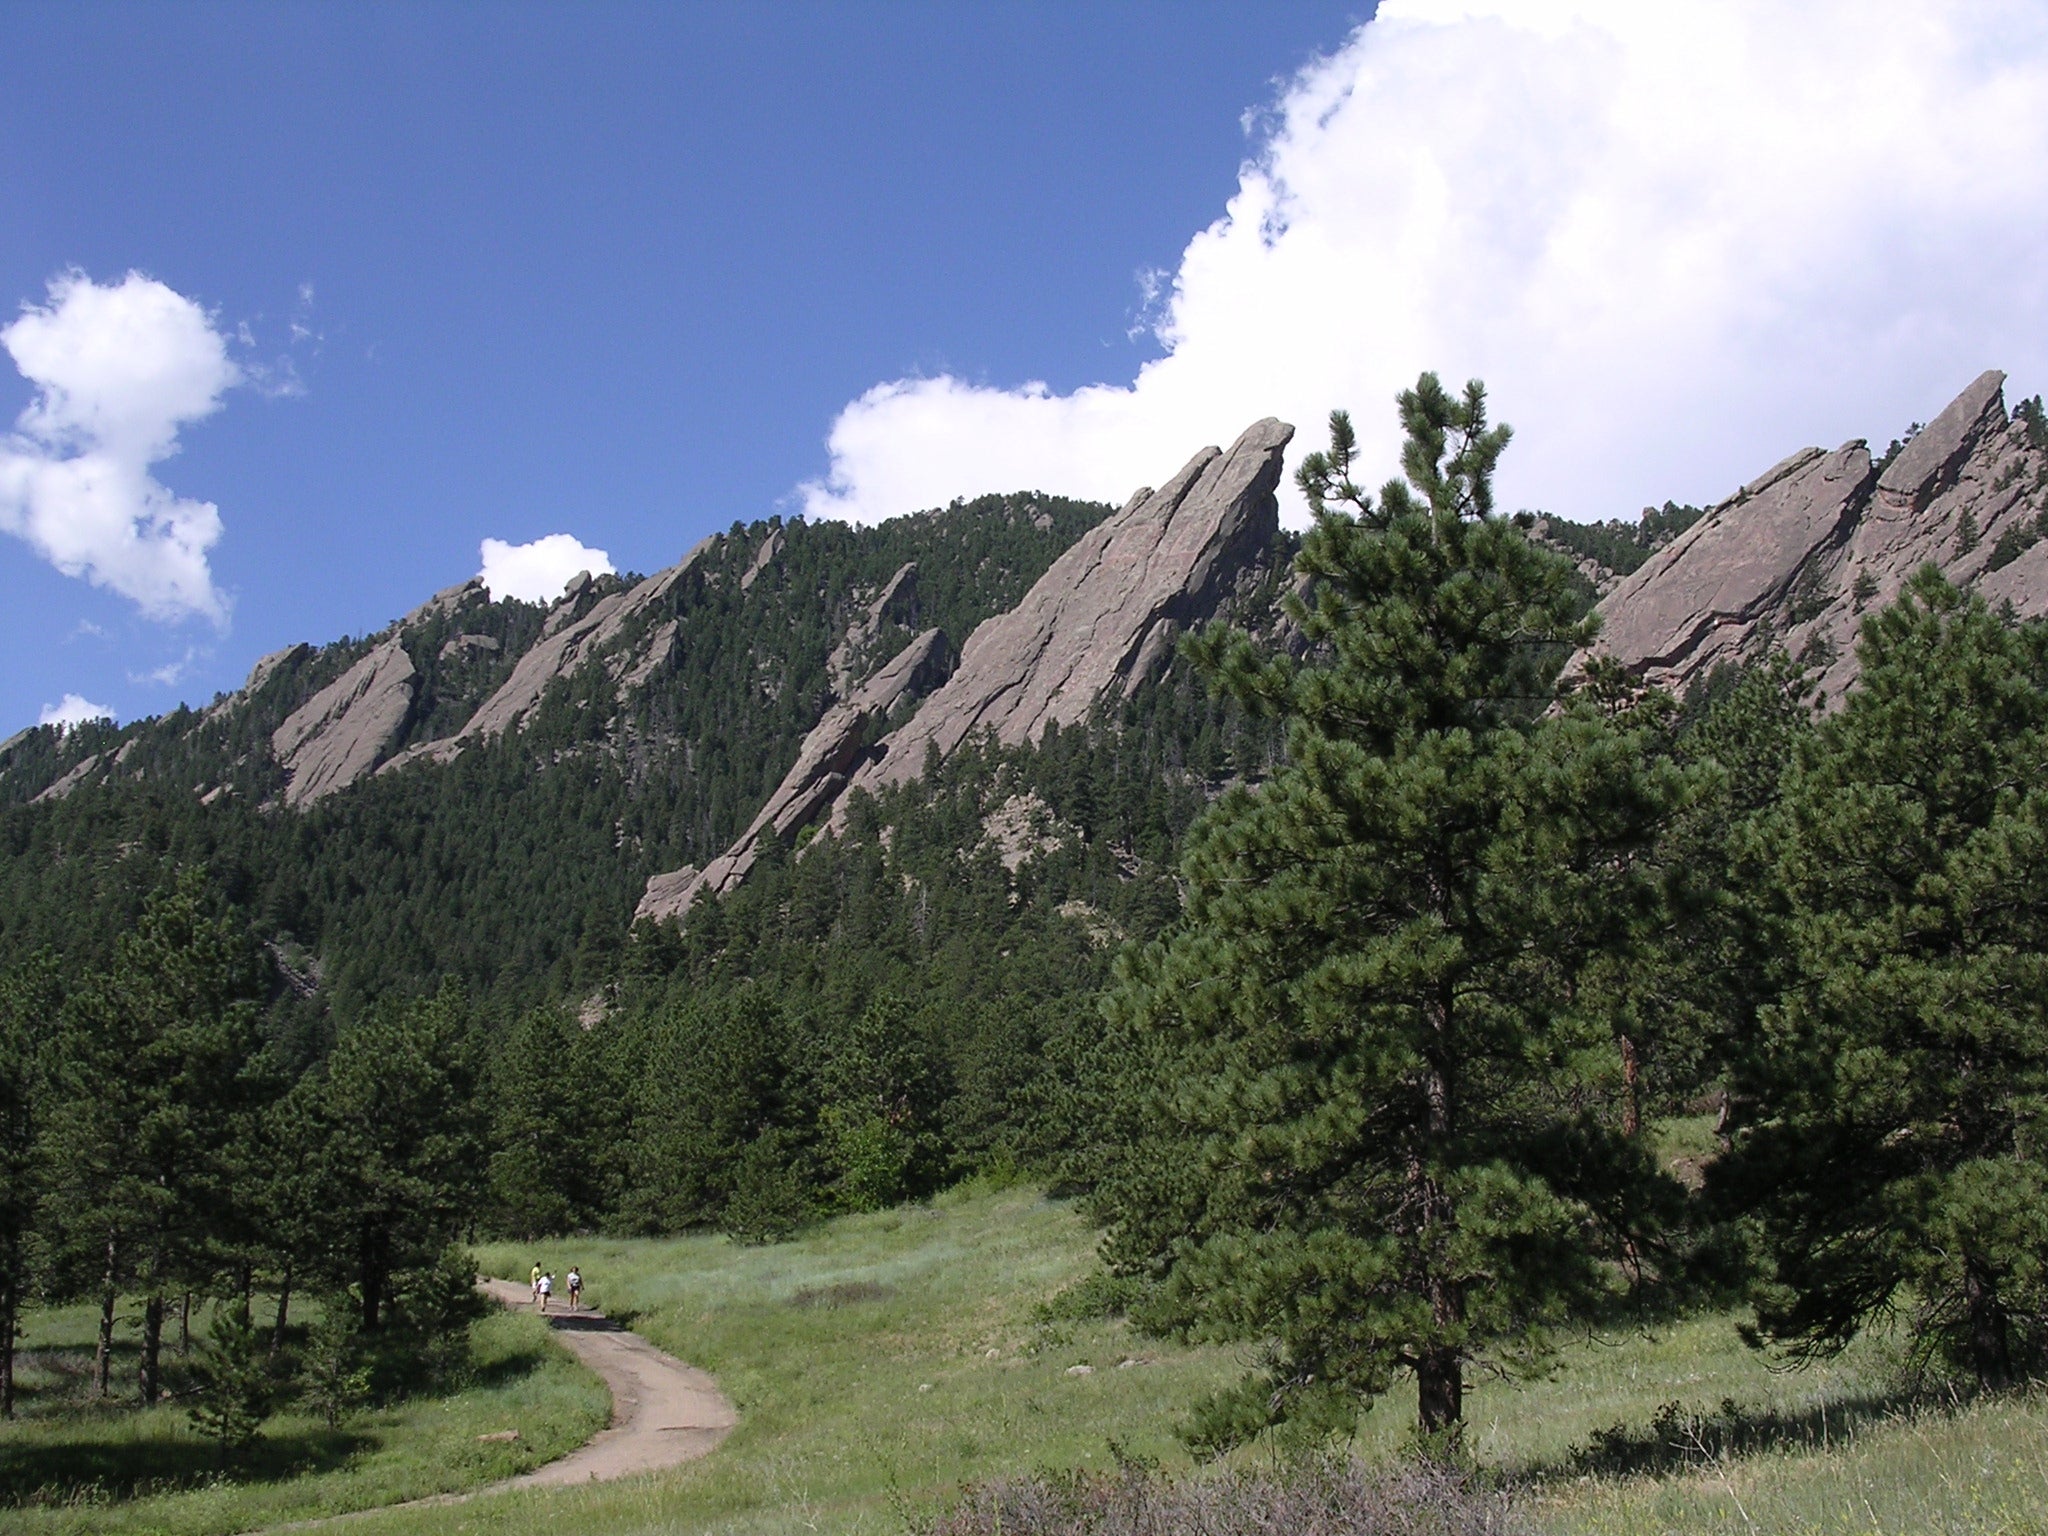 Boulder Flatirons mountain range is a great place for a hike